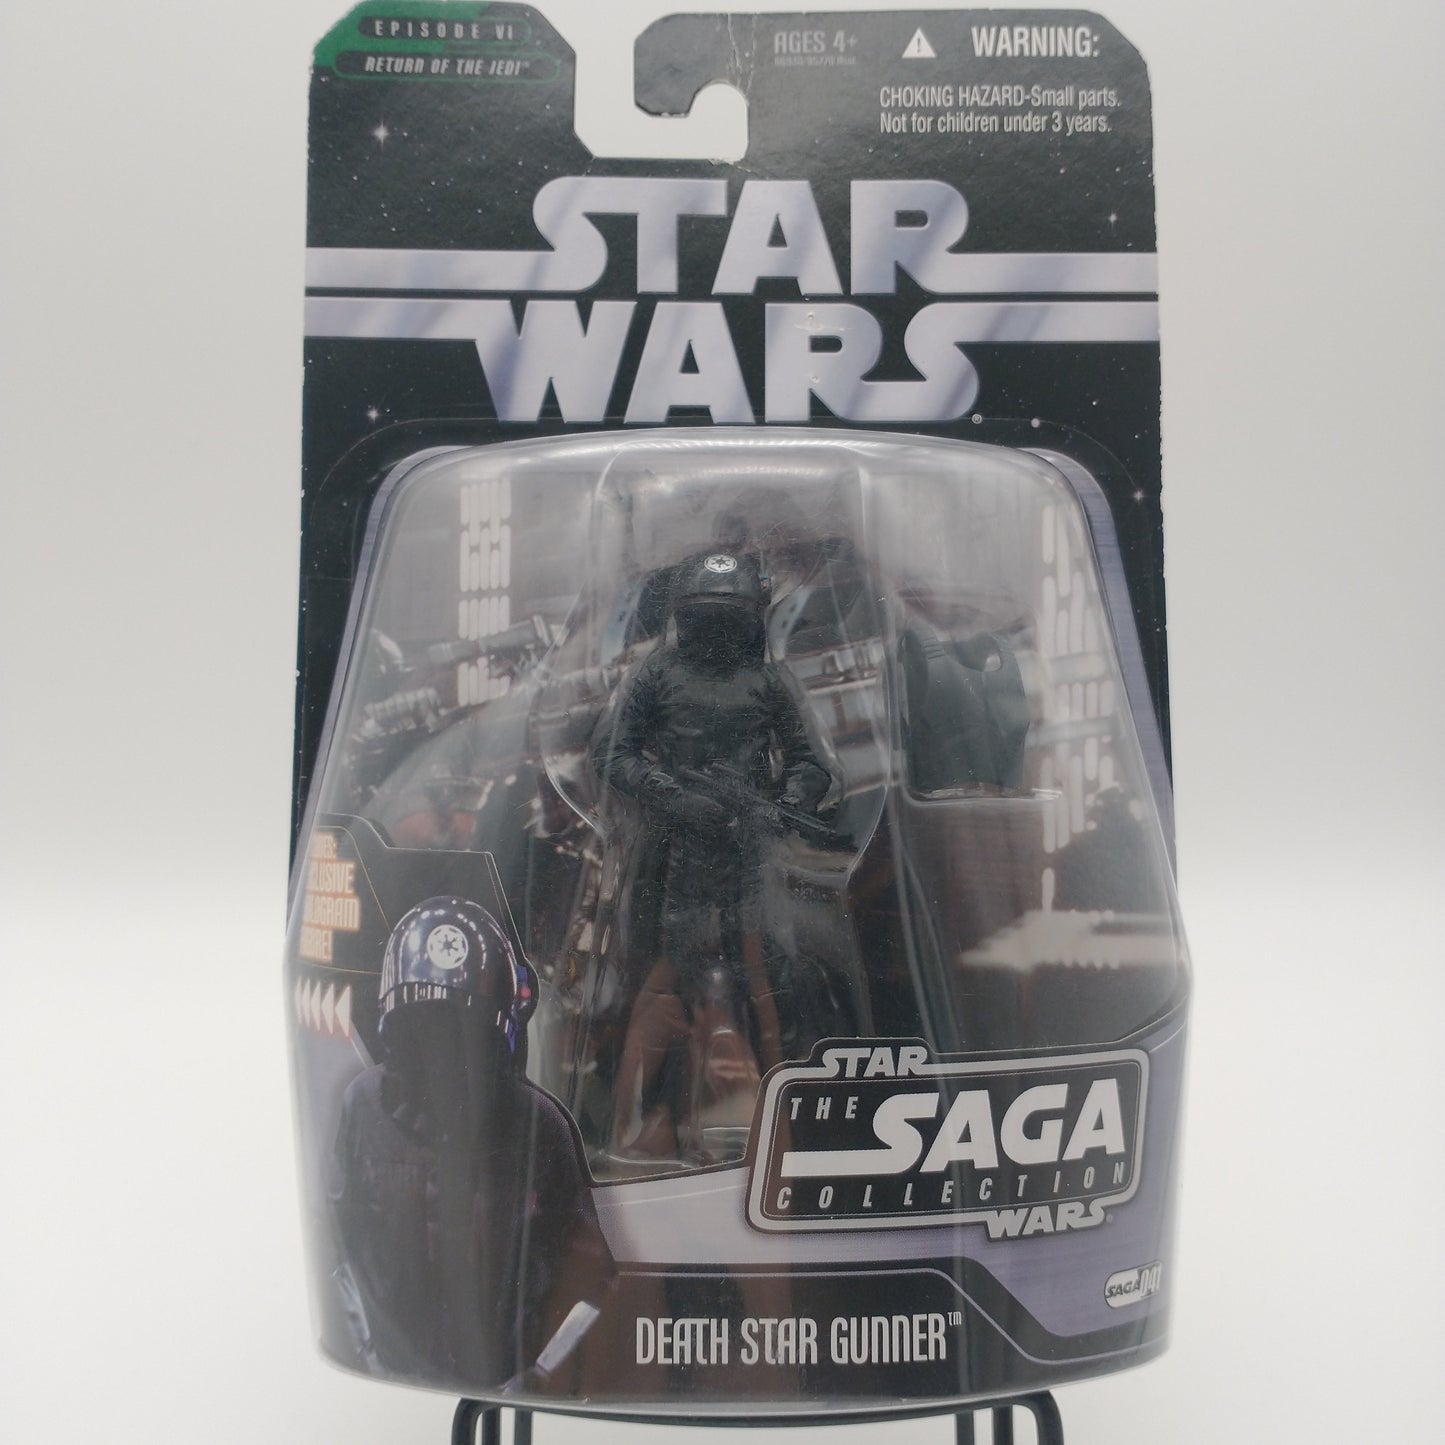 The front ofhte card and bubble. The action figure inside is wearing a black helmet and a black uniform